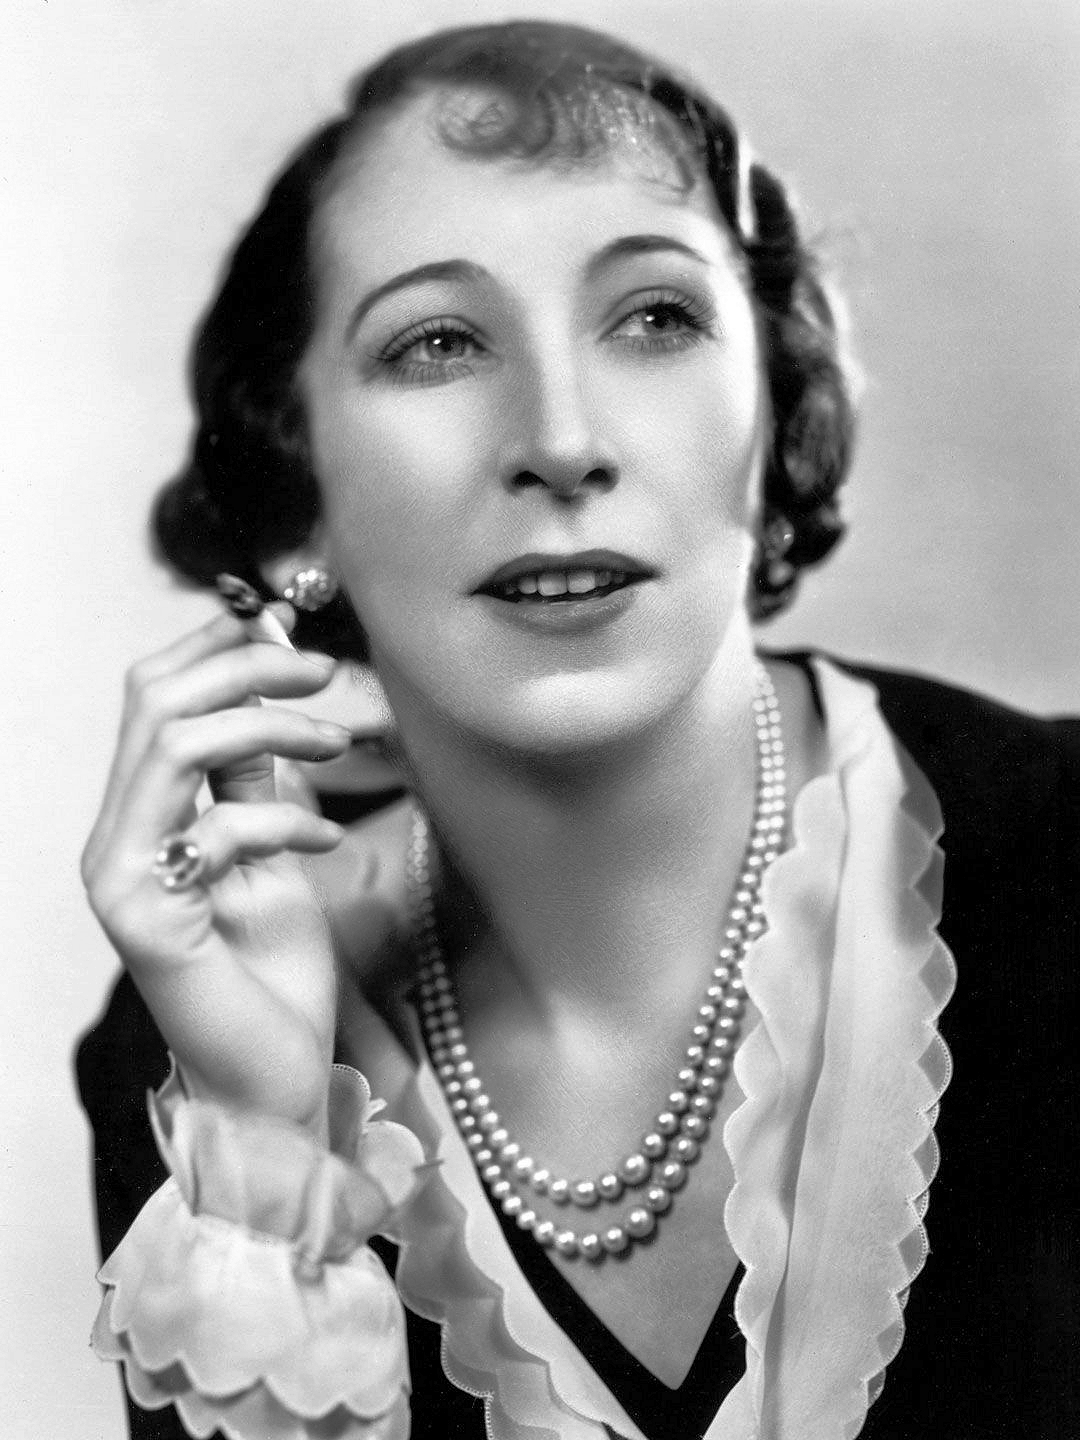 Photograph of British actress, Martita Hunt (1). The actress wears pearls while smoking a cigarette